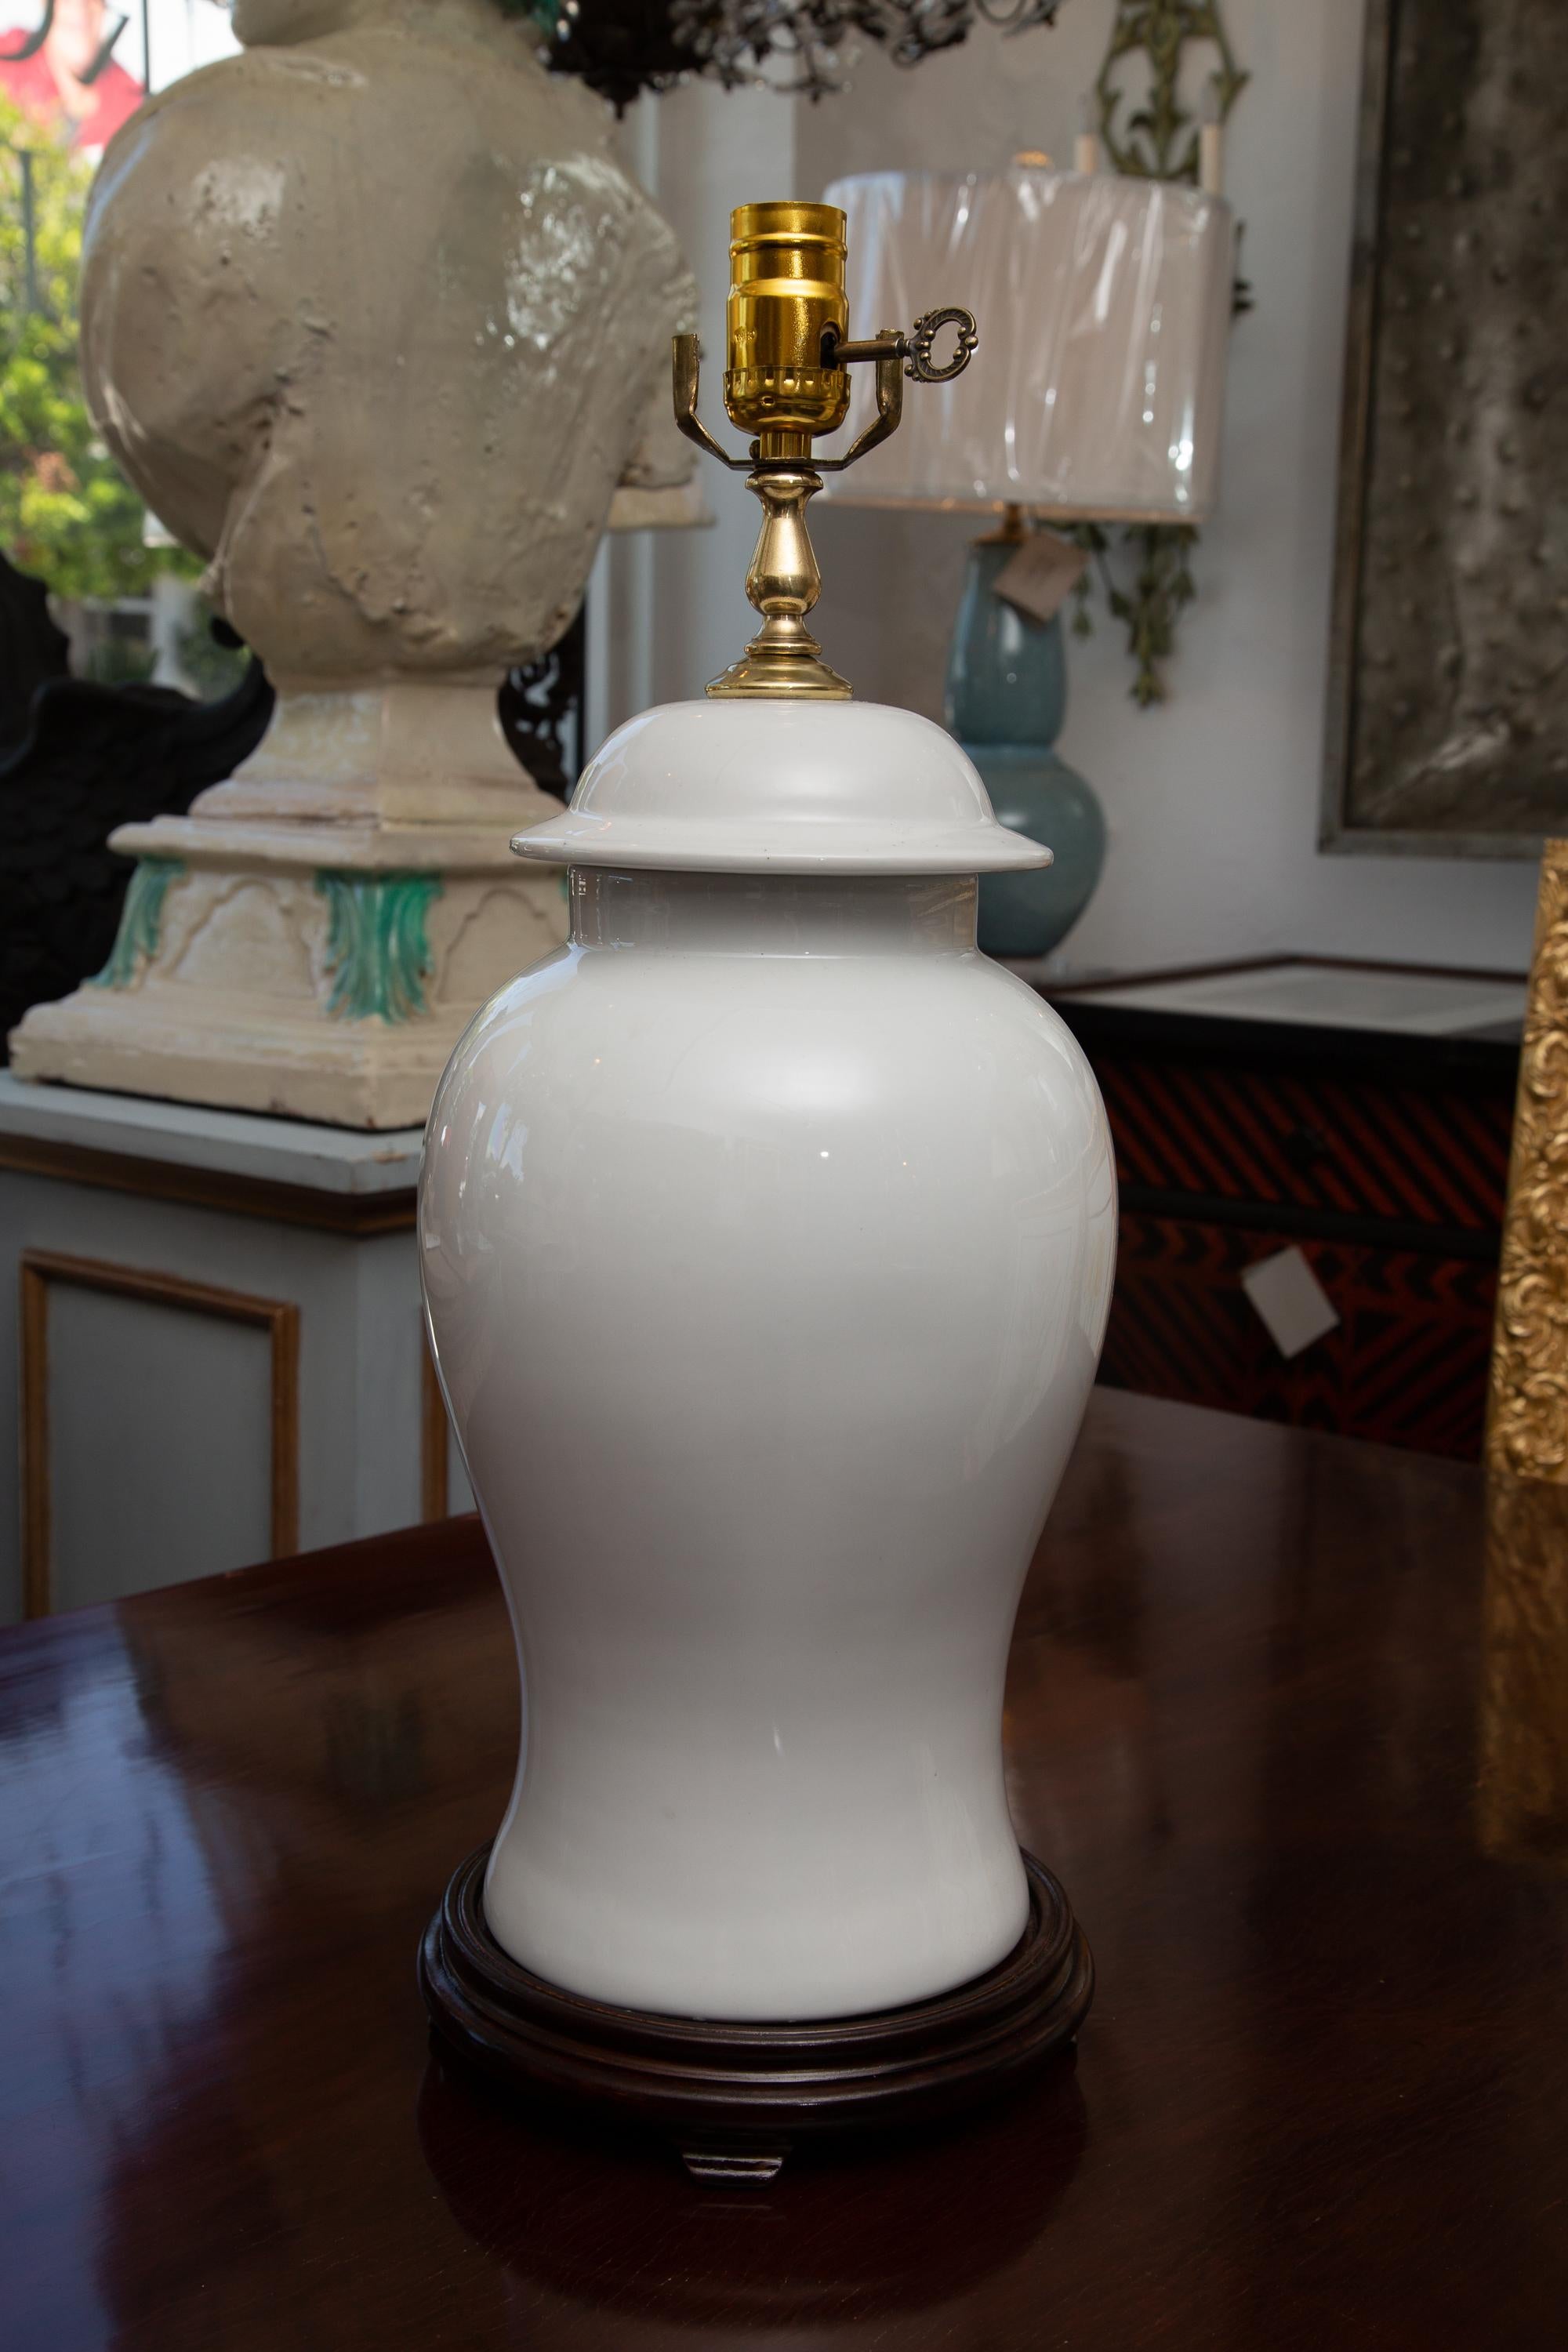 Mid-20th Century Chinese Blanc de Chine Ginger Jar Vases as Table Lamp.